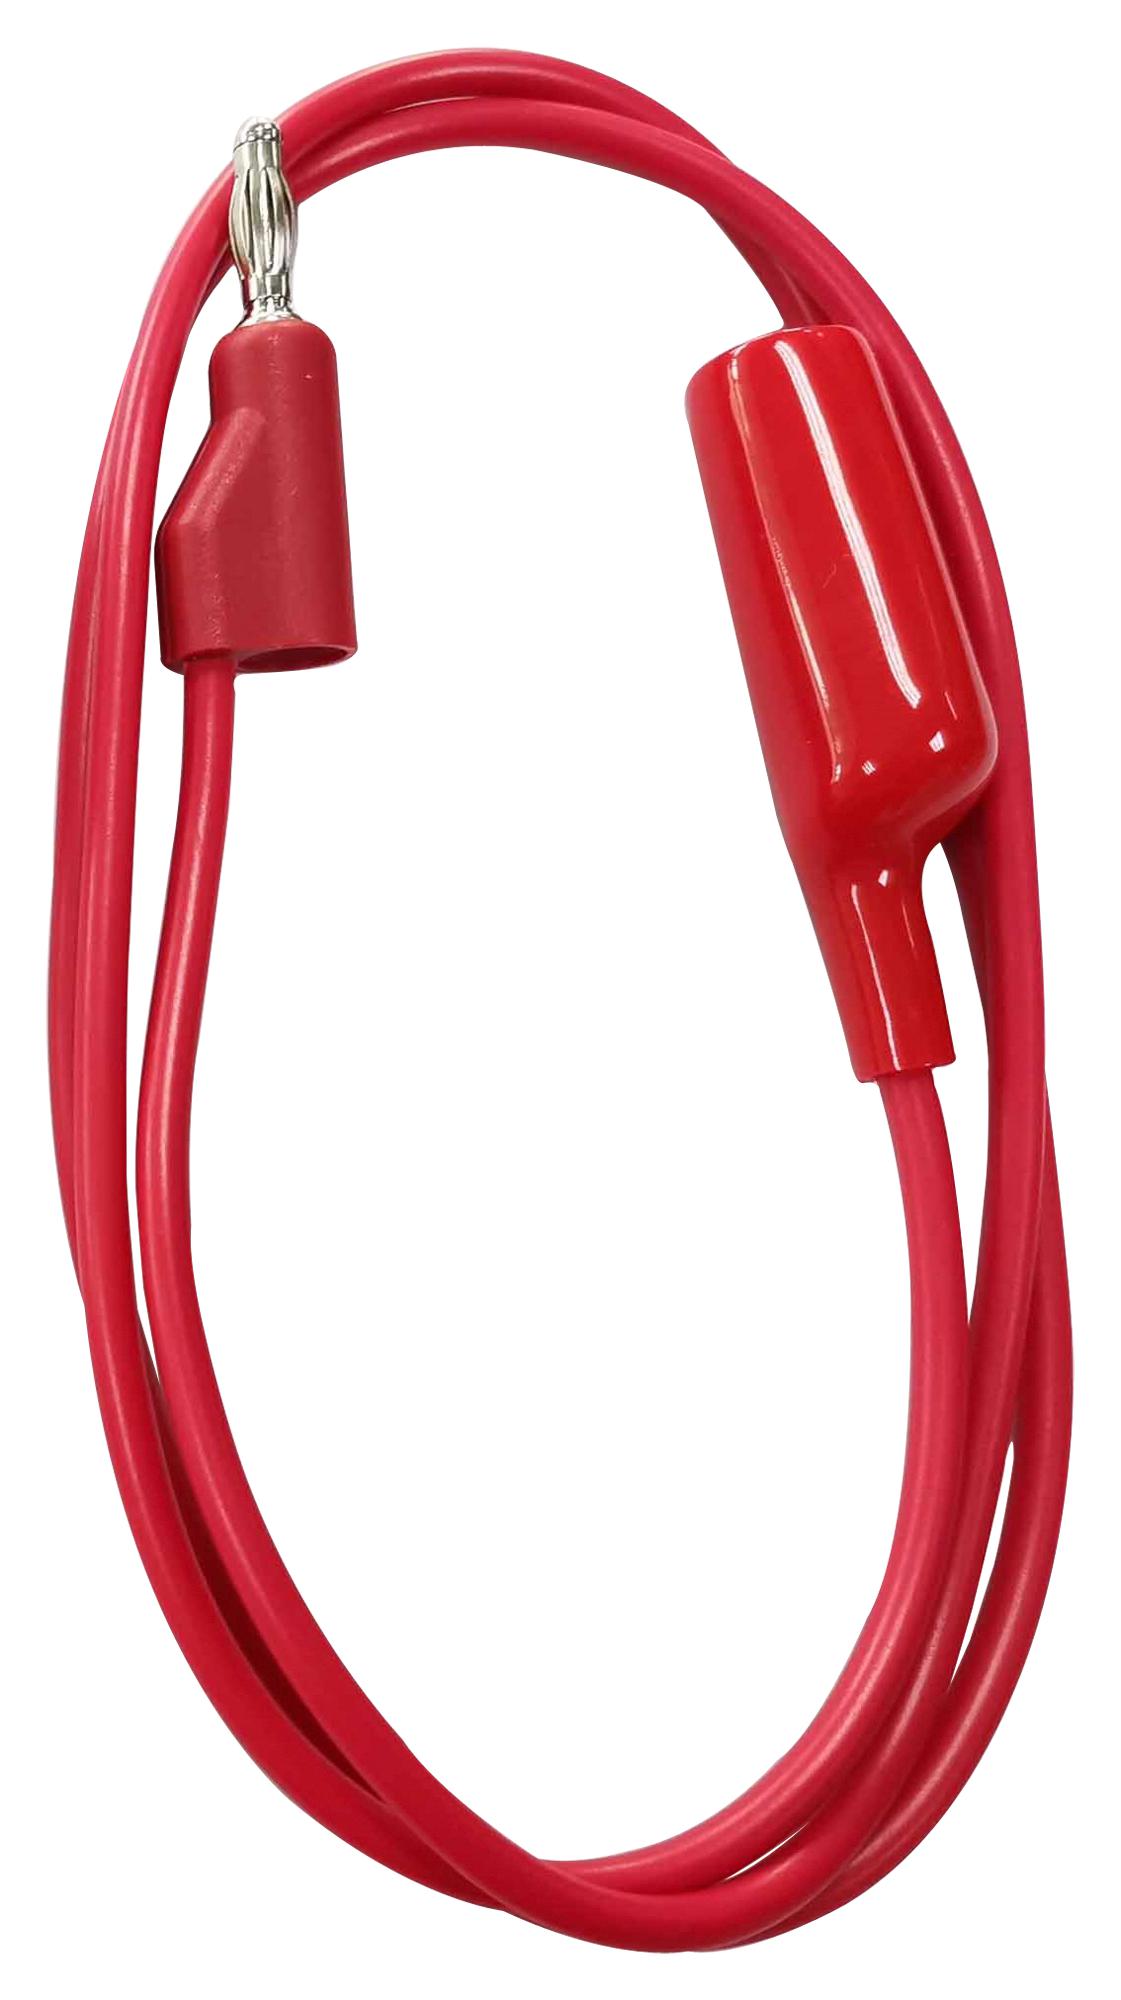 MP770271 TEST LEAD, 10A, 60V, 1.524M, RED MULTICOMP PRO